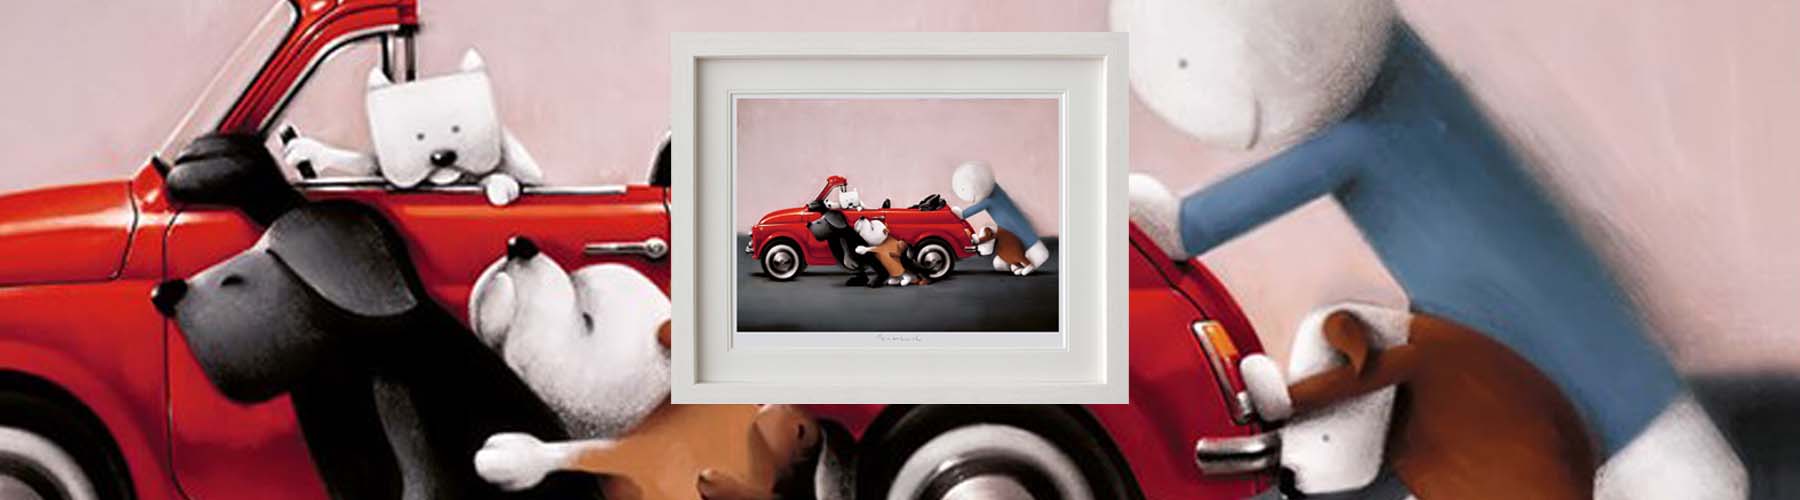 New Art Release Feature - Doug Hyde - Teamwork LImited Edition print